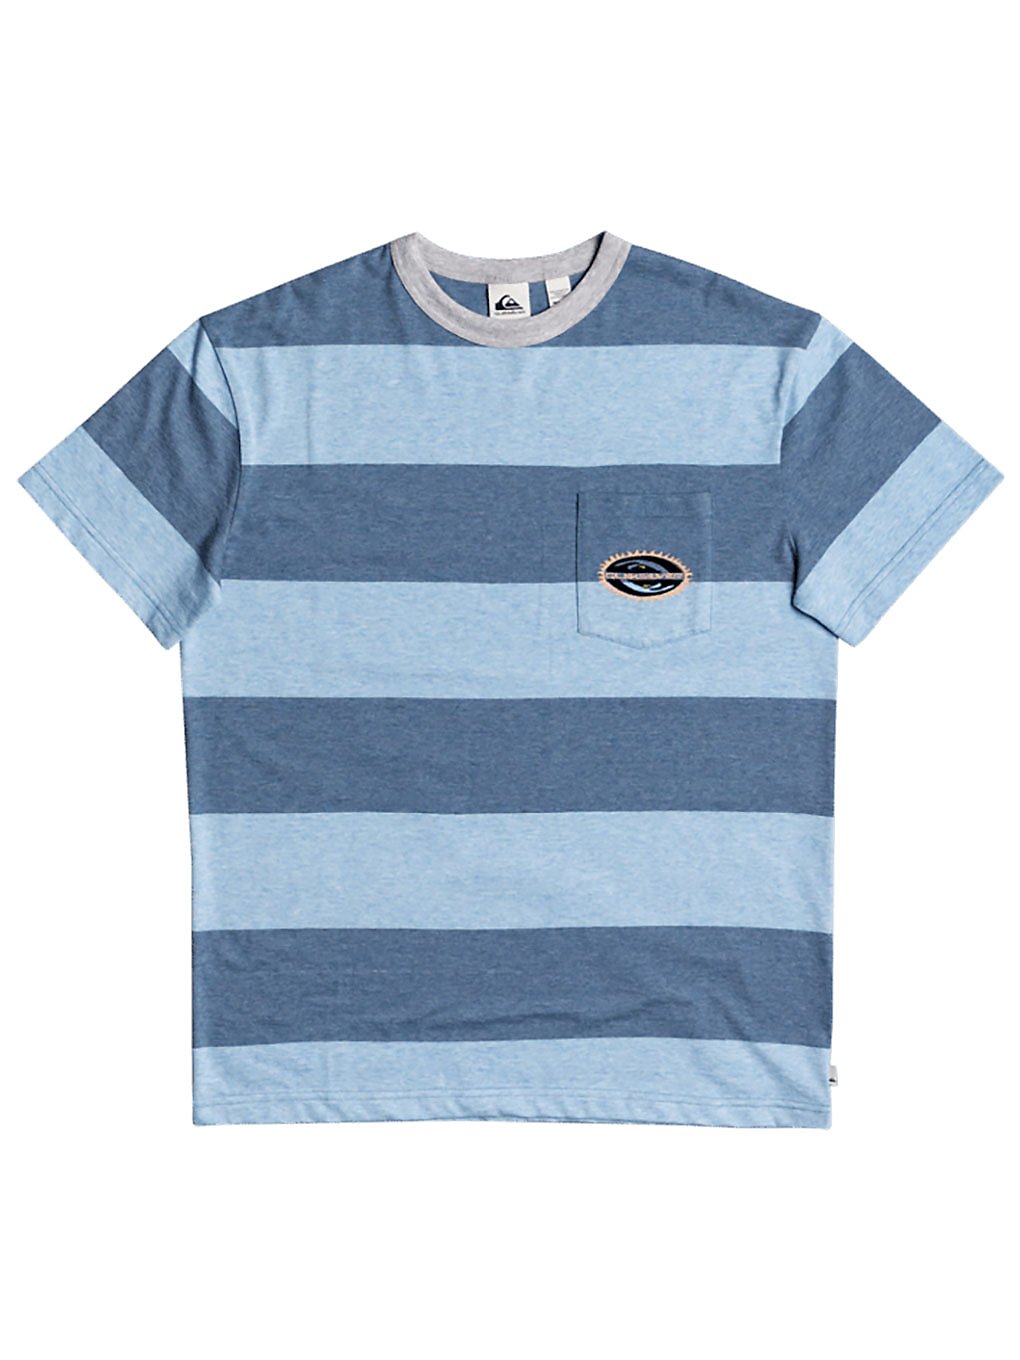 Quiksilver Full Charge T-Shirt captain blue full charge